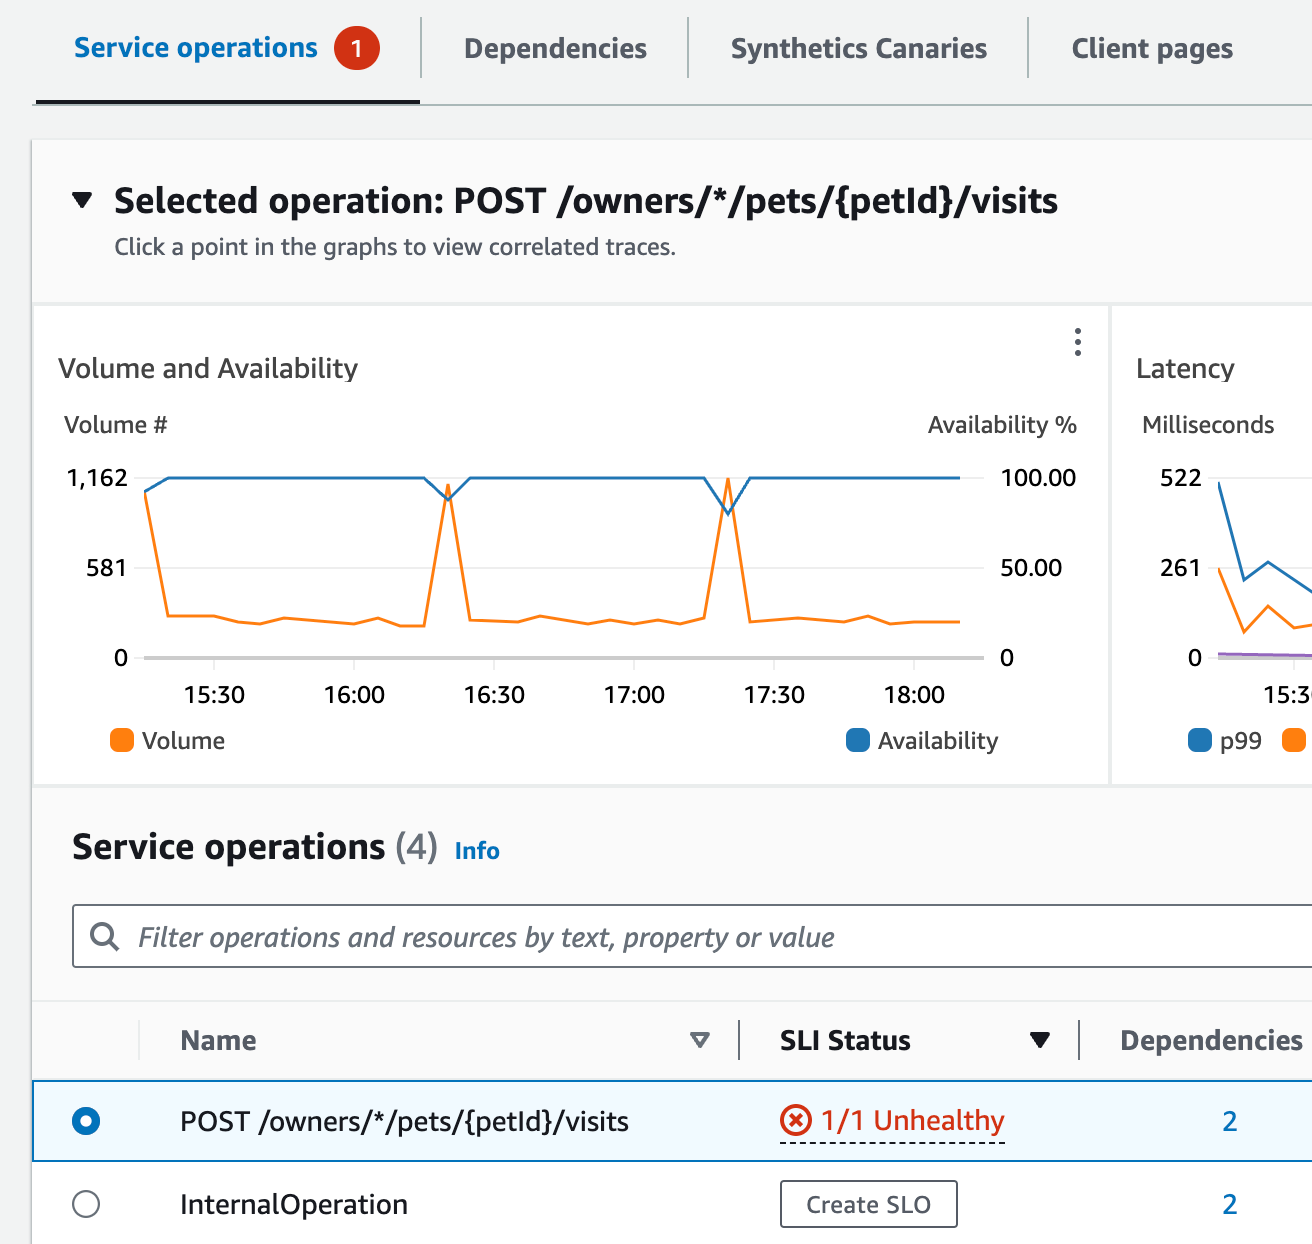 Service operation volume and availability